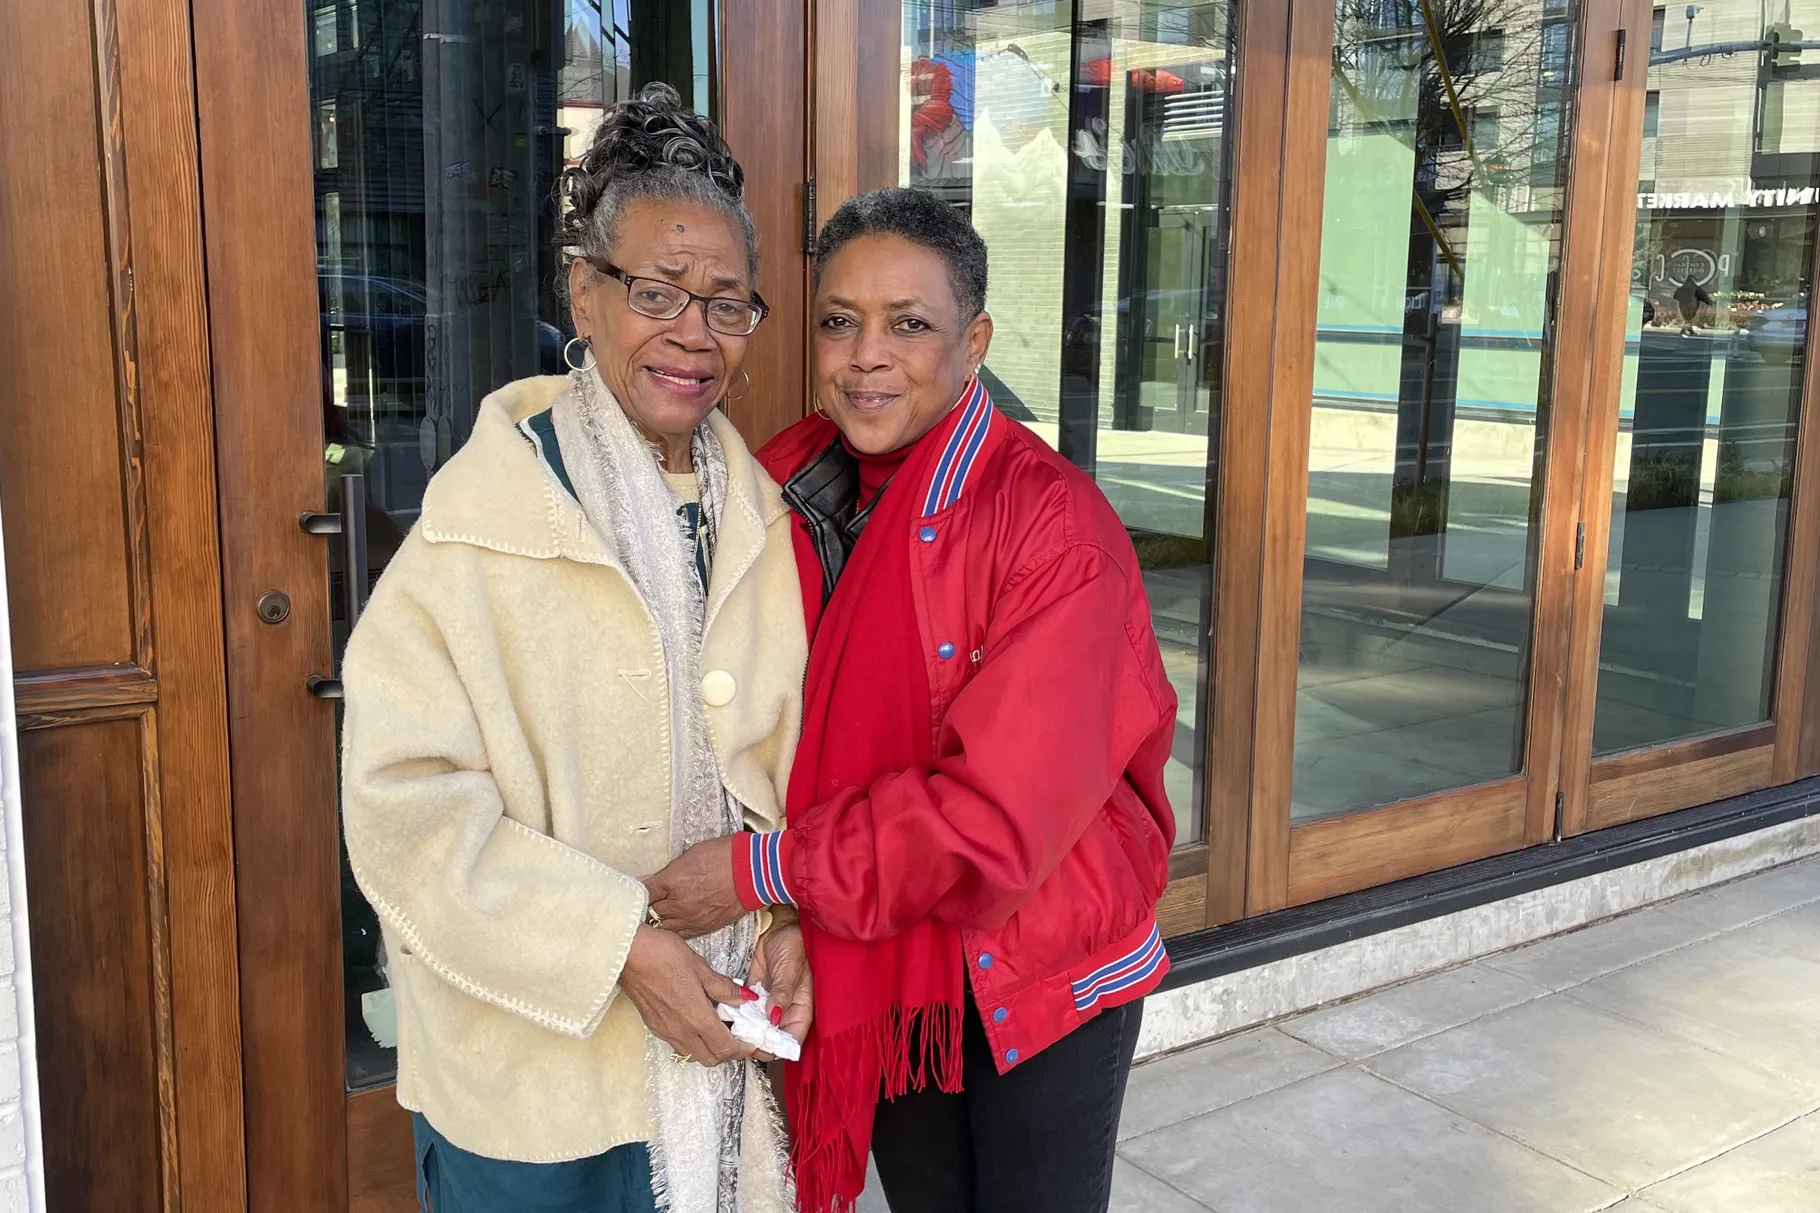 Two Black women stand in front of a storefront